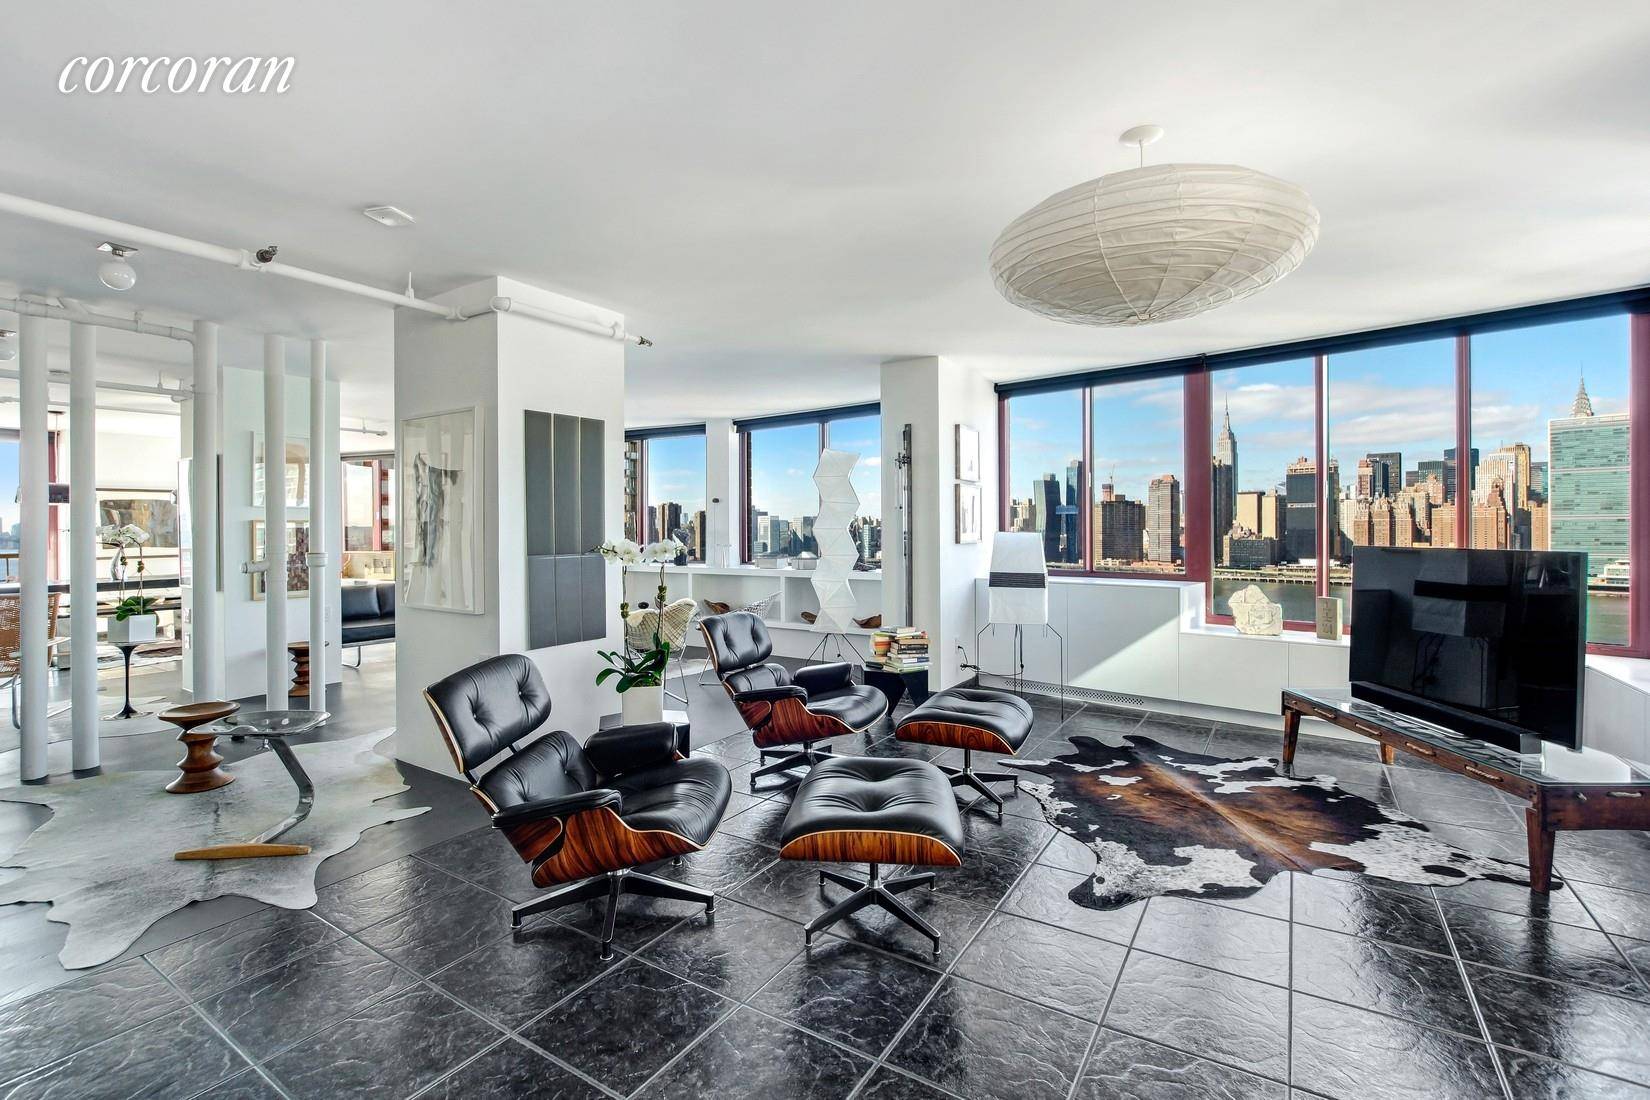 One of a kind ! Spanning over 2, 200 SF this exceptional split 3 bedroom, 2 bathroom residence offers jaw dropping panoramic Manhattan views overlooking Gantry State Park.